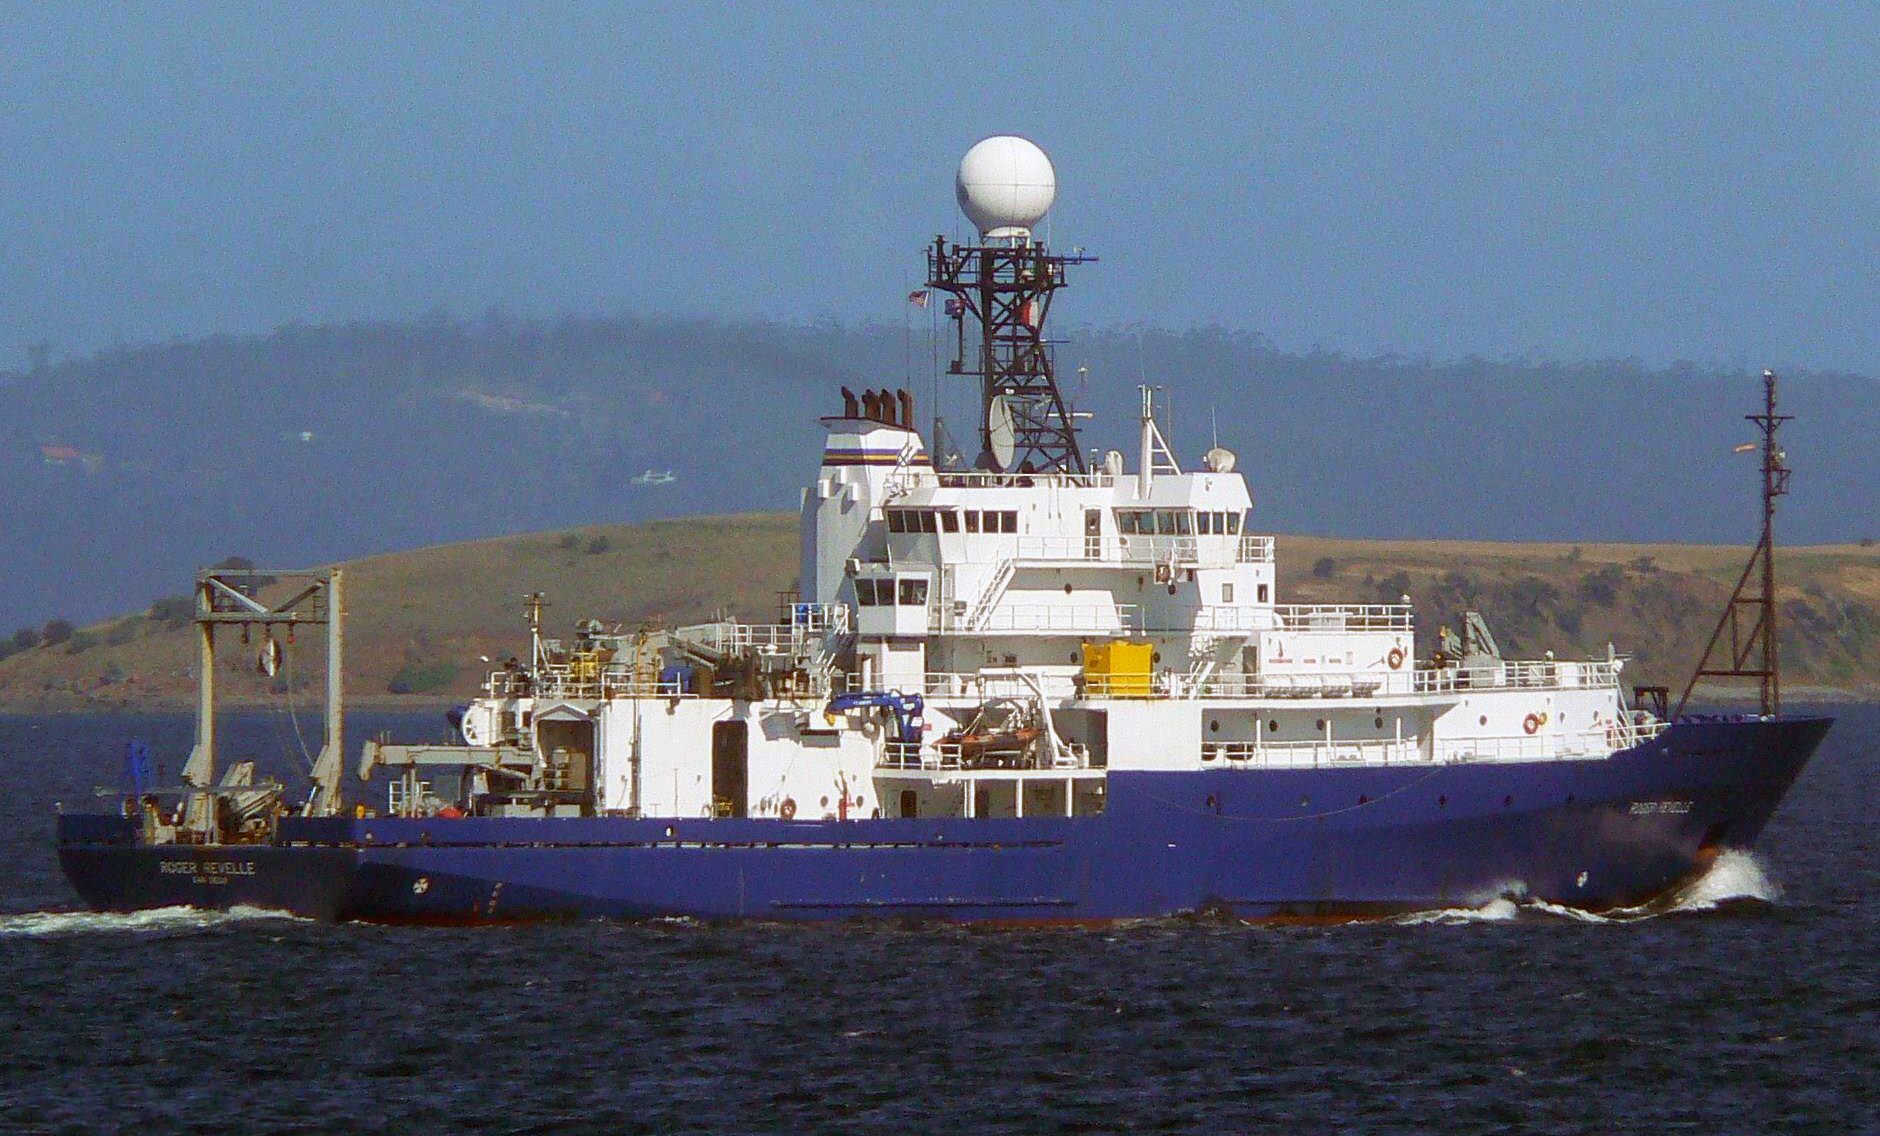 crew of a research vessel